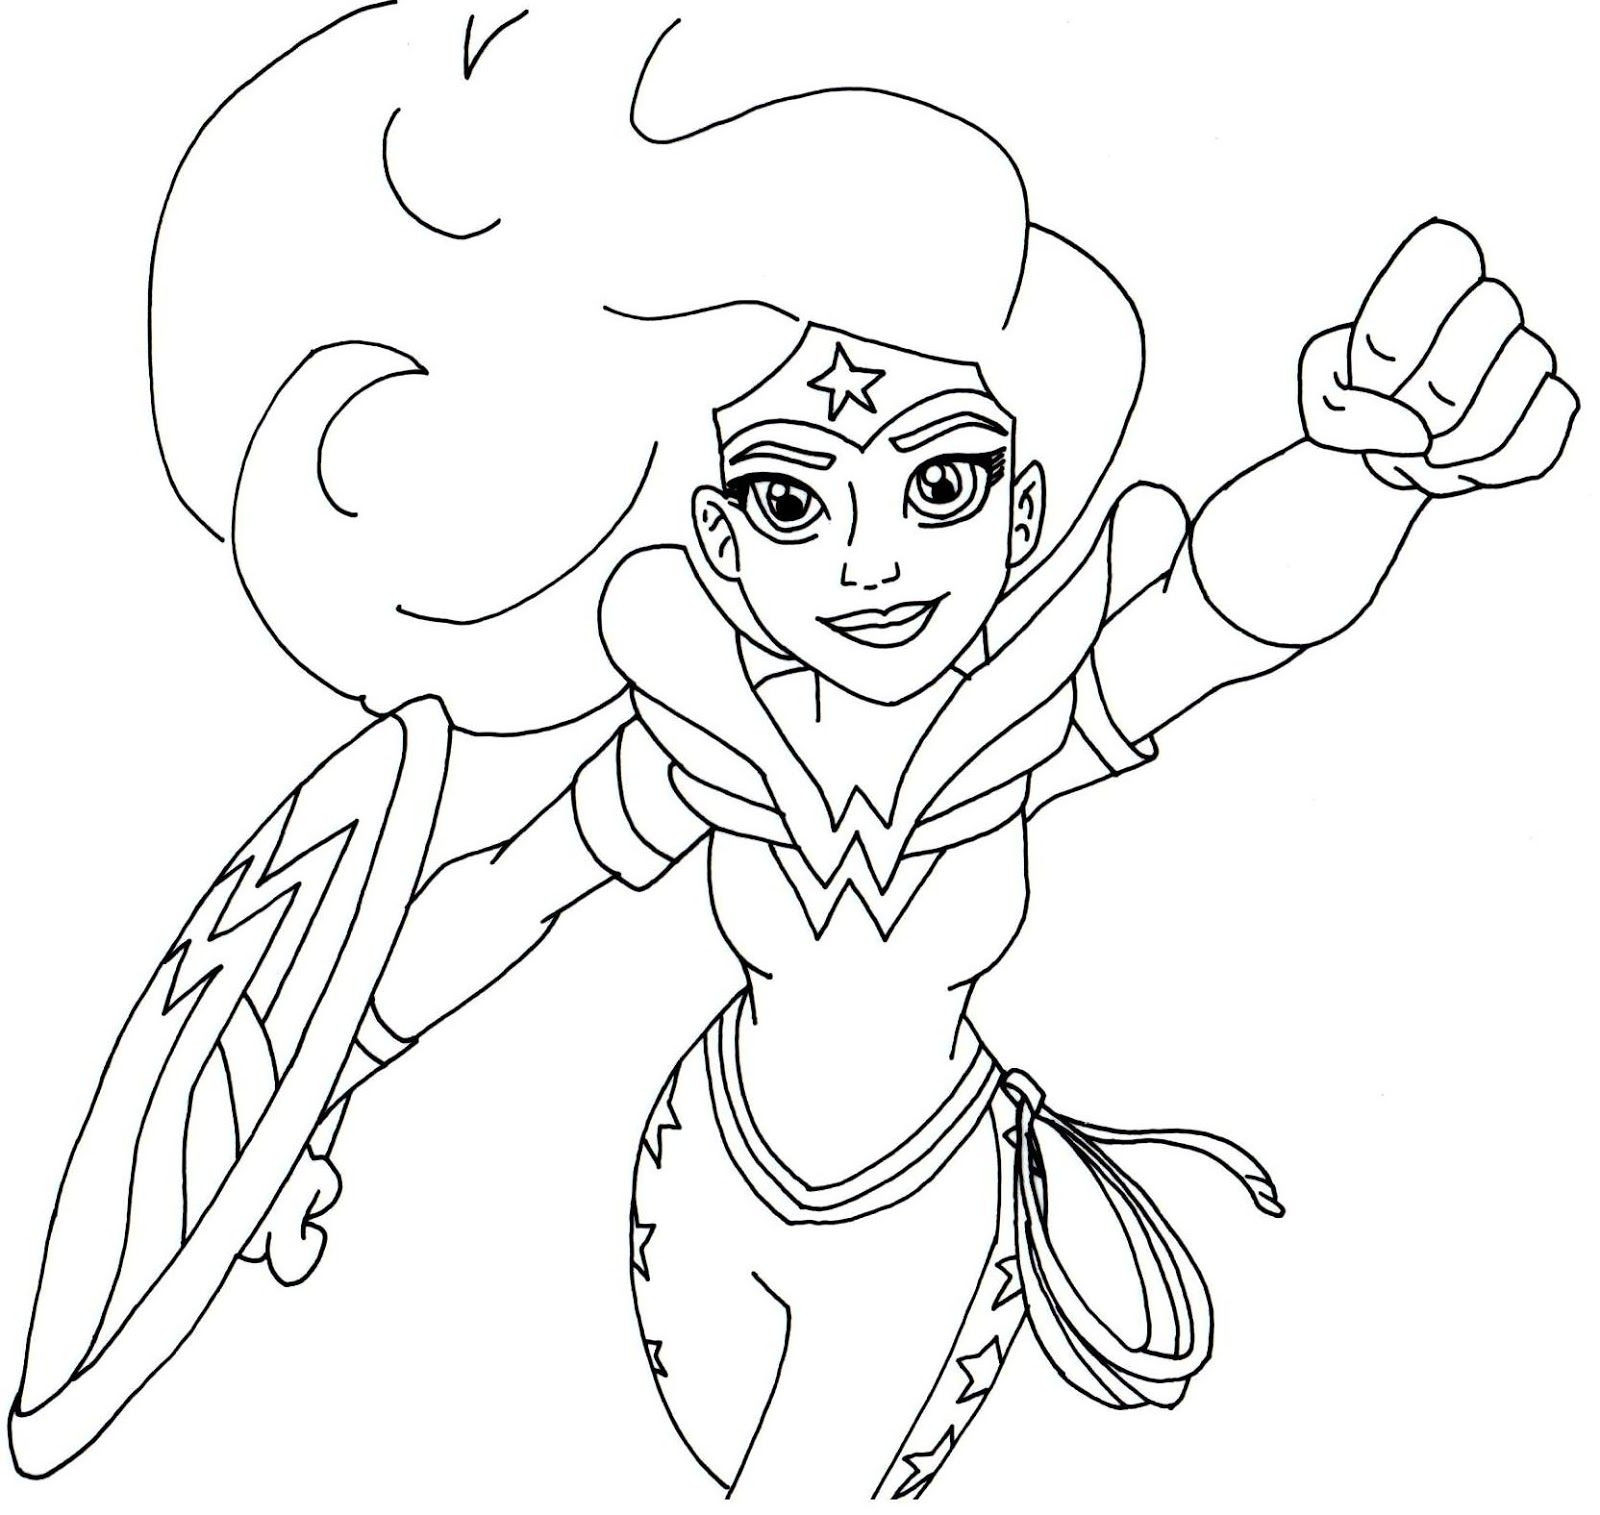 Coloring Pages Superheroes
 Superhero Coloring Pages Collection Free Coloring Books